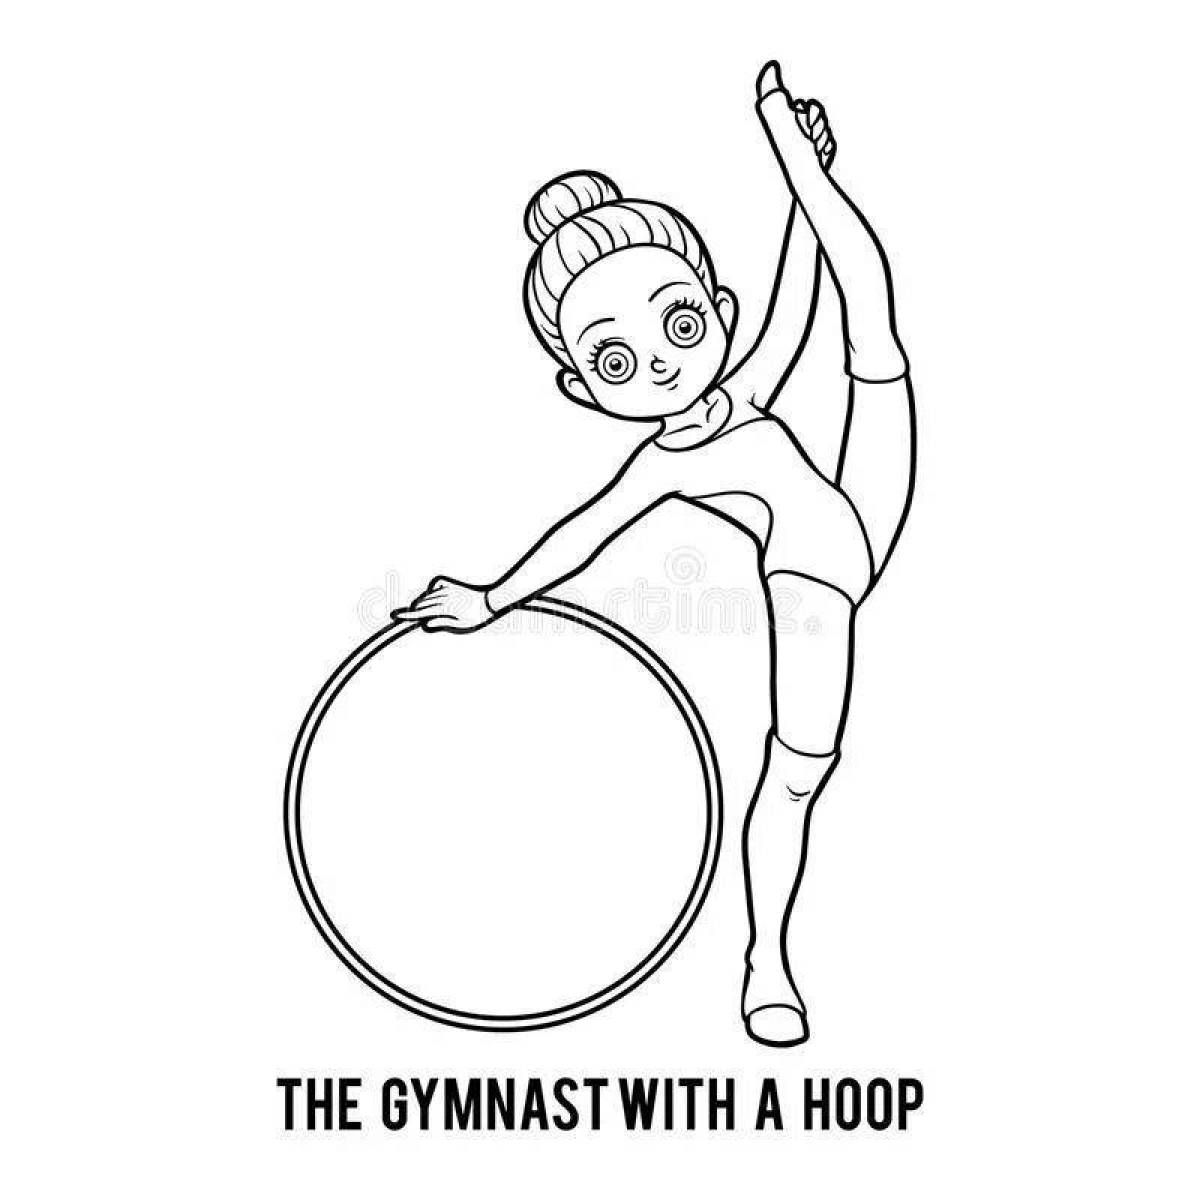 Punch hoop coloring page